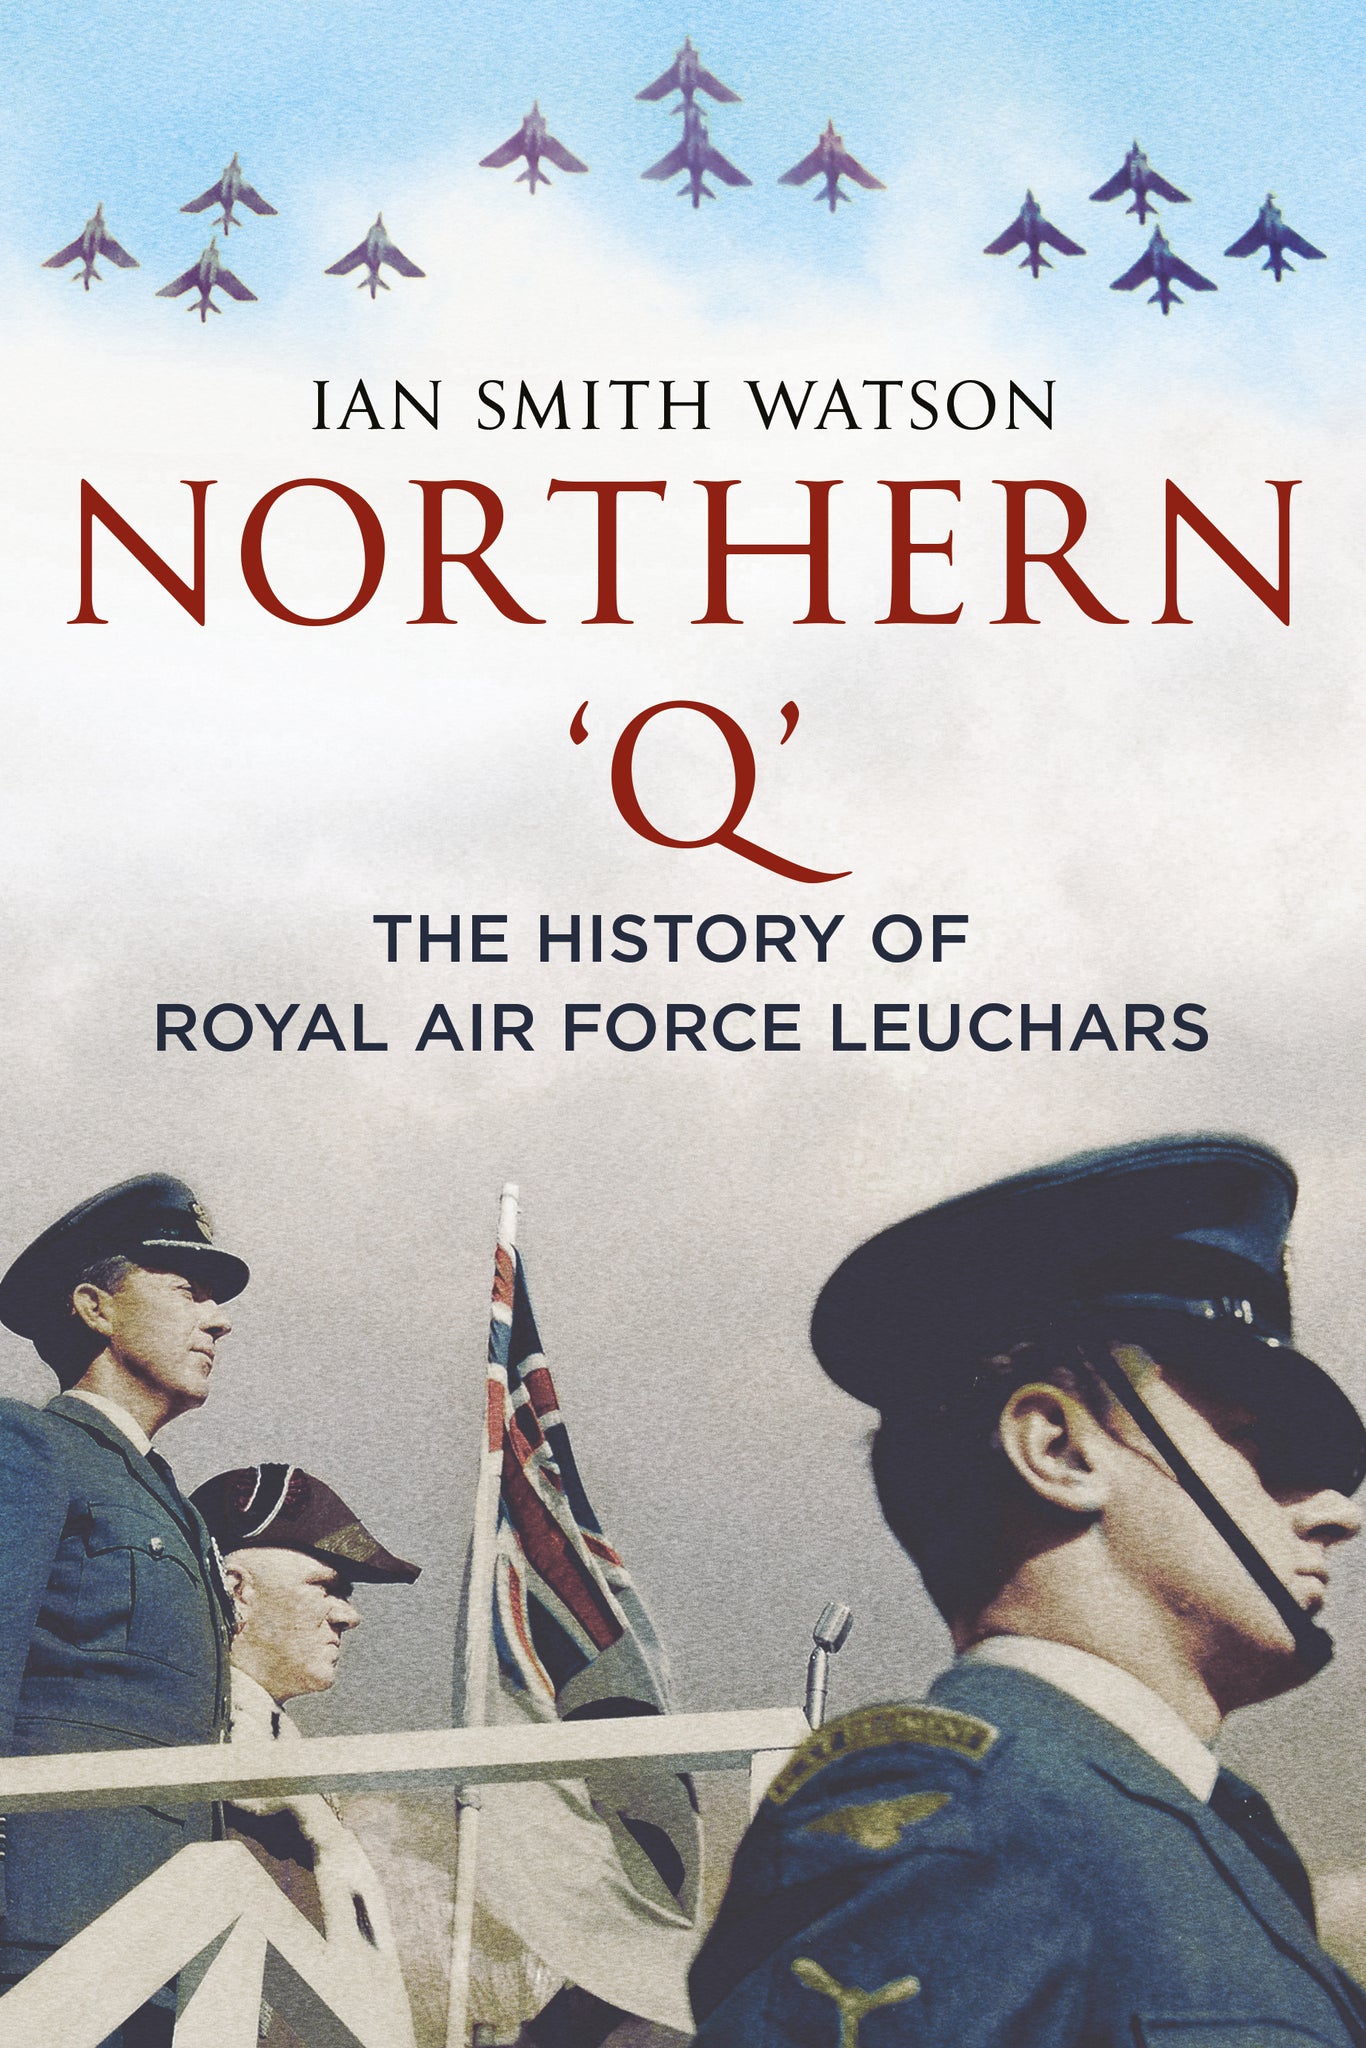 Northern ‘Q’: The History of Royal Air Force Leuchars (paperback edition)